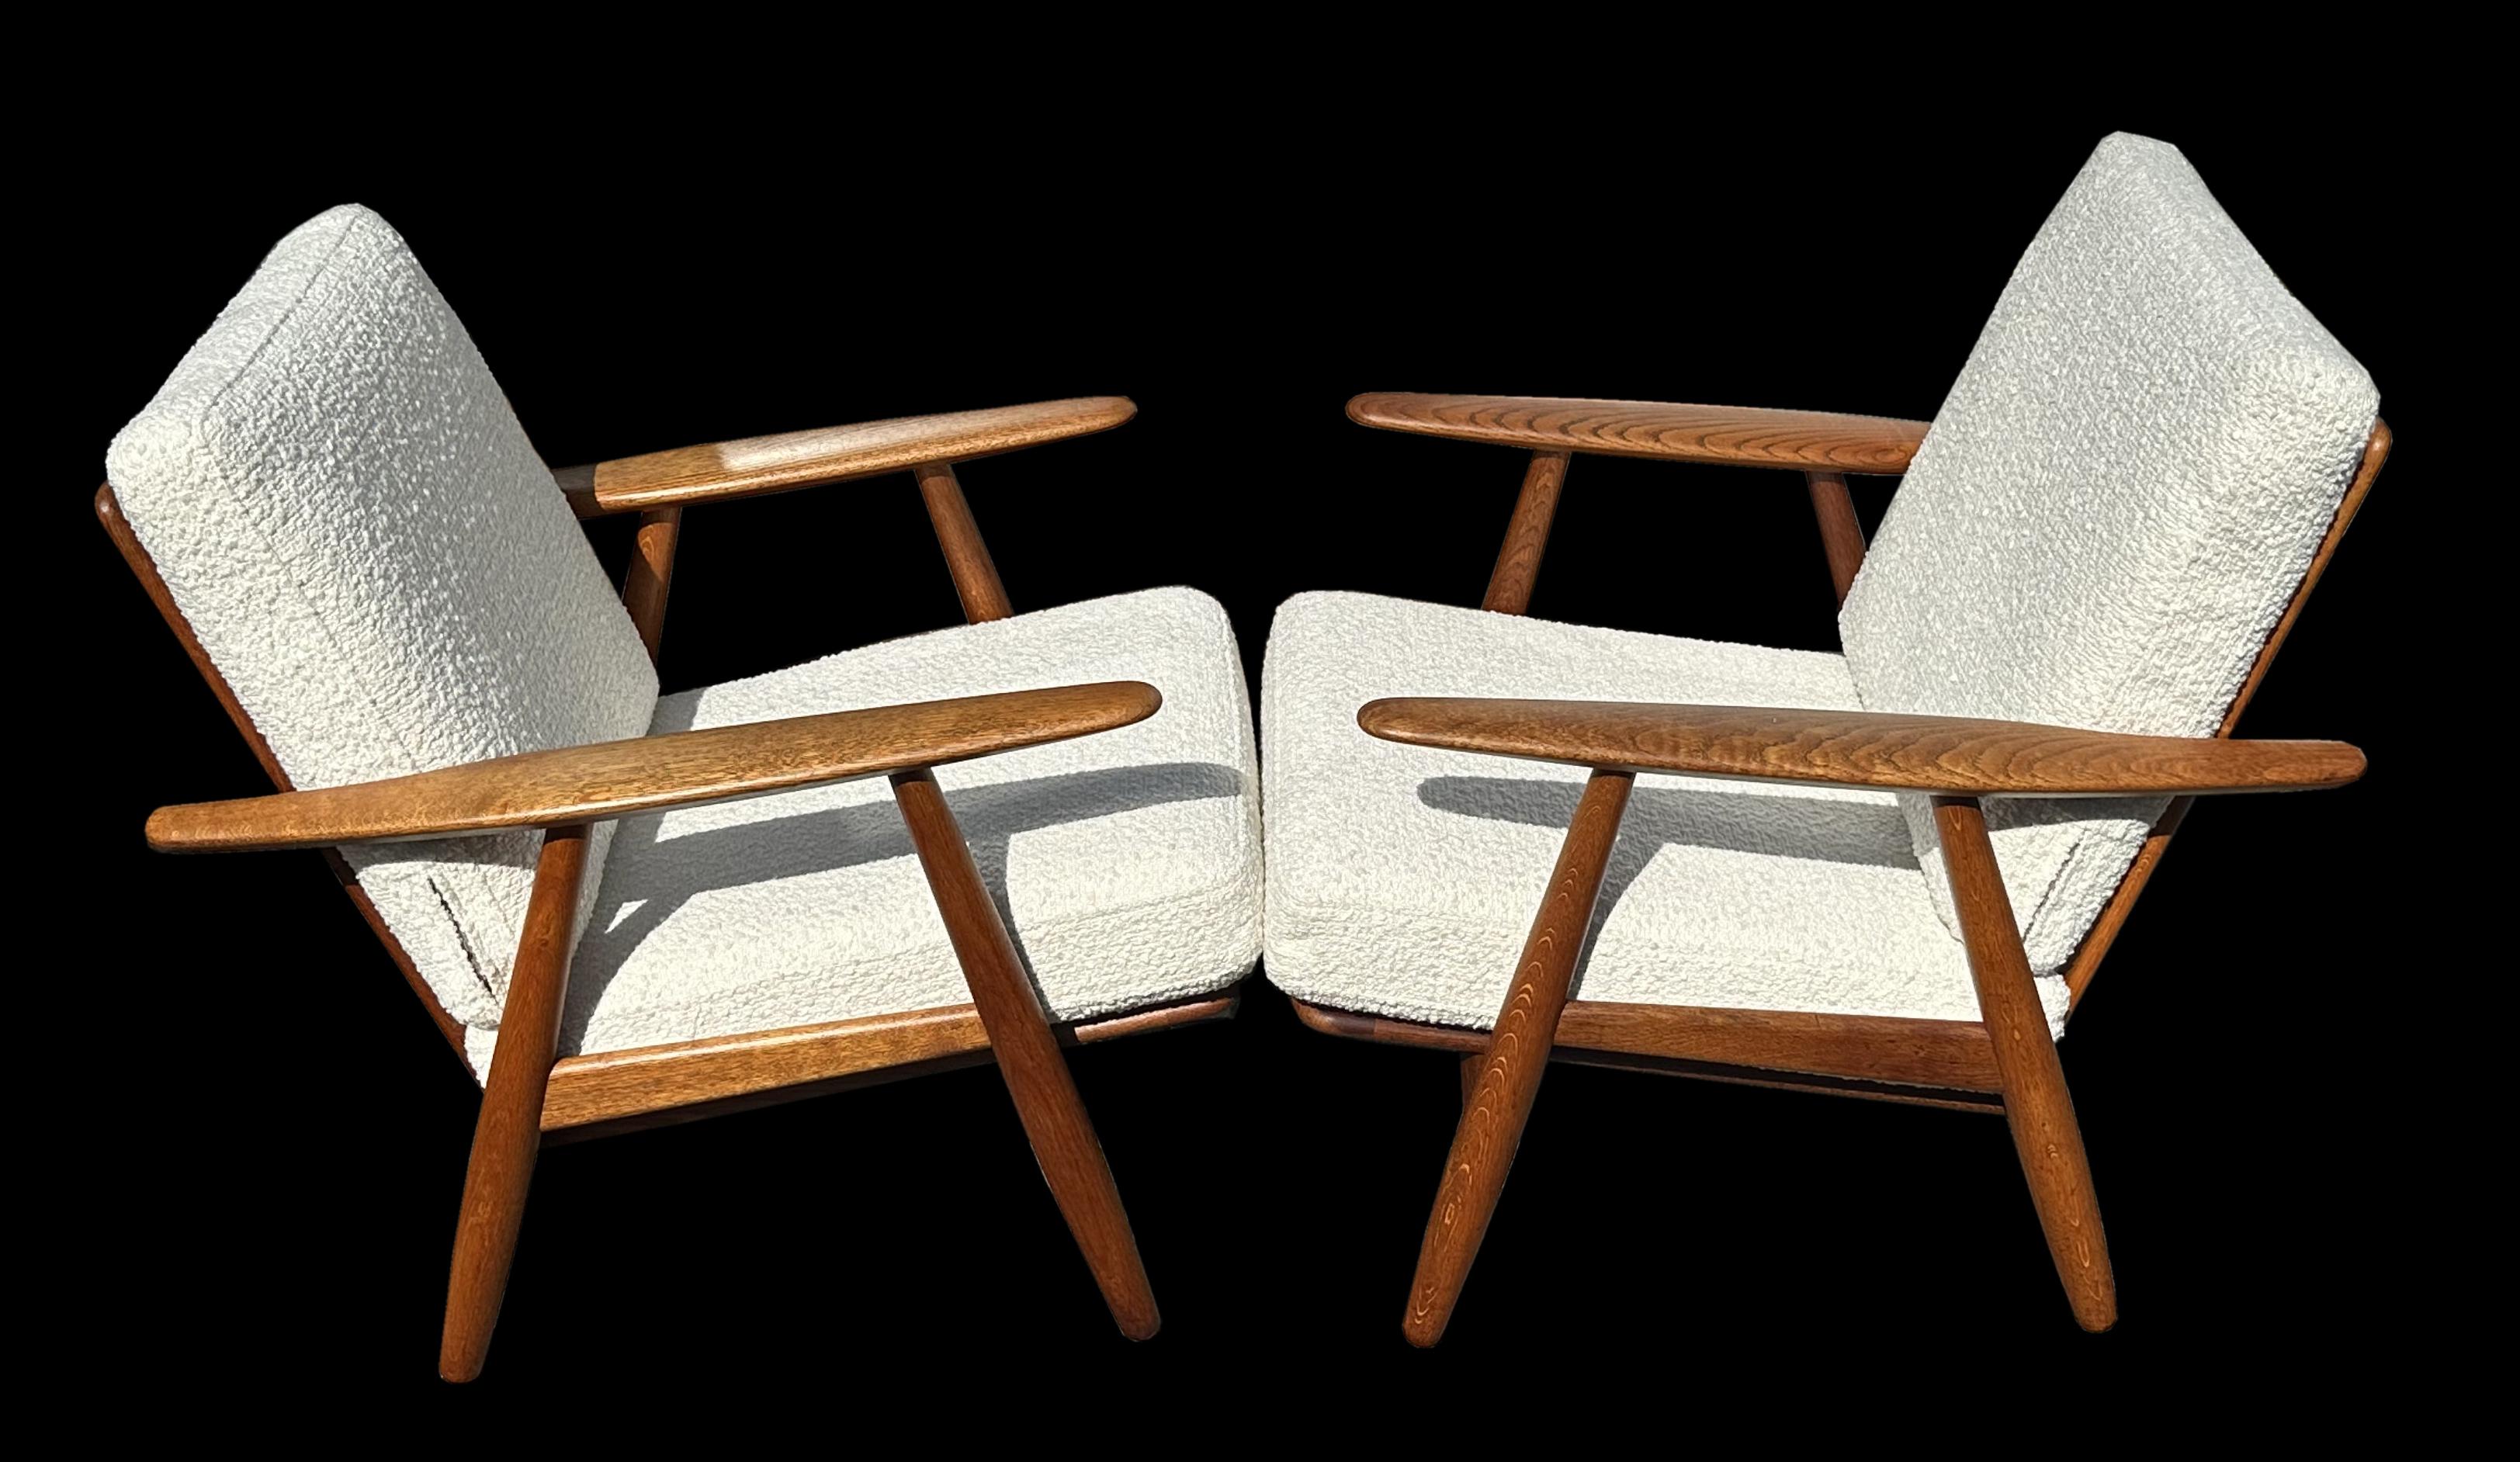 Fine original 1950s pair of these super comfortable classic chairs by master designer Hans J Wegner for GETAMA.
The frames in oak and fresh bouclé fabric covers ready for your midcentury living or office space.